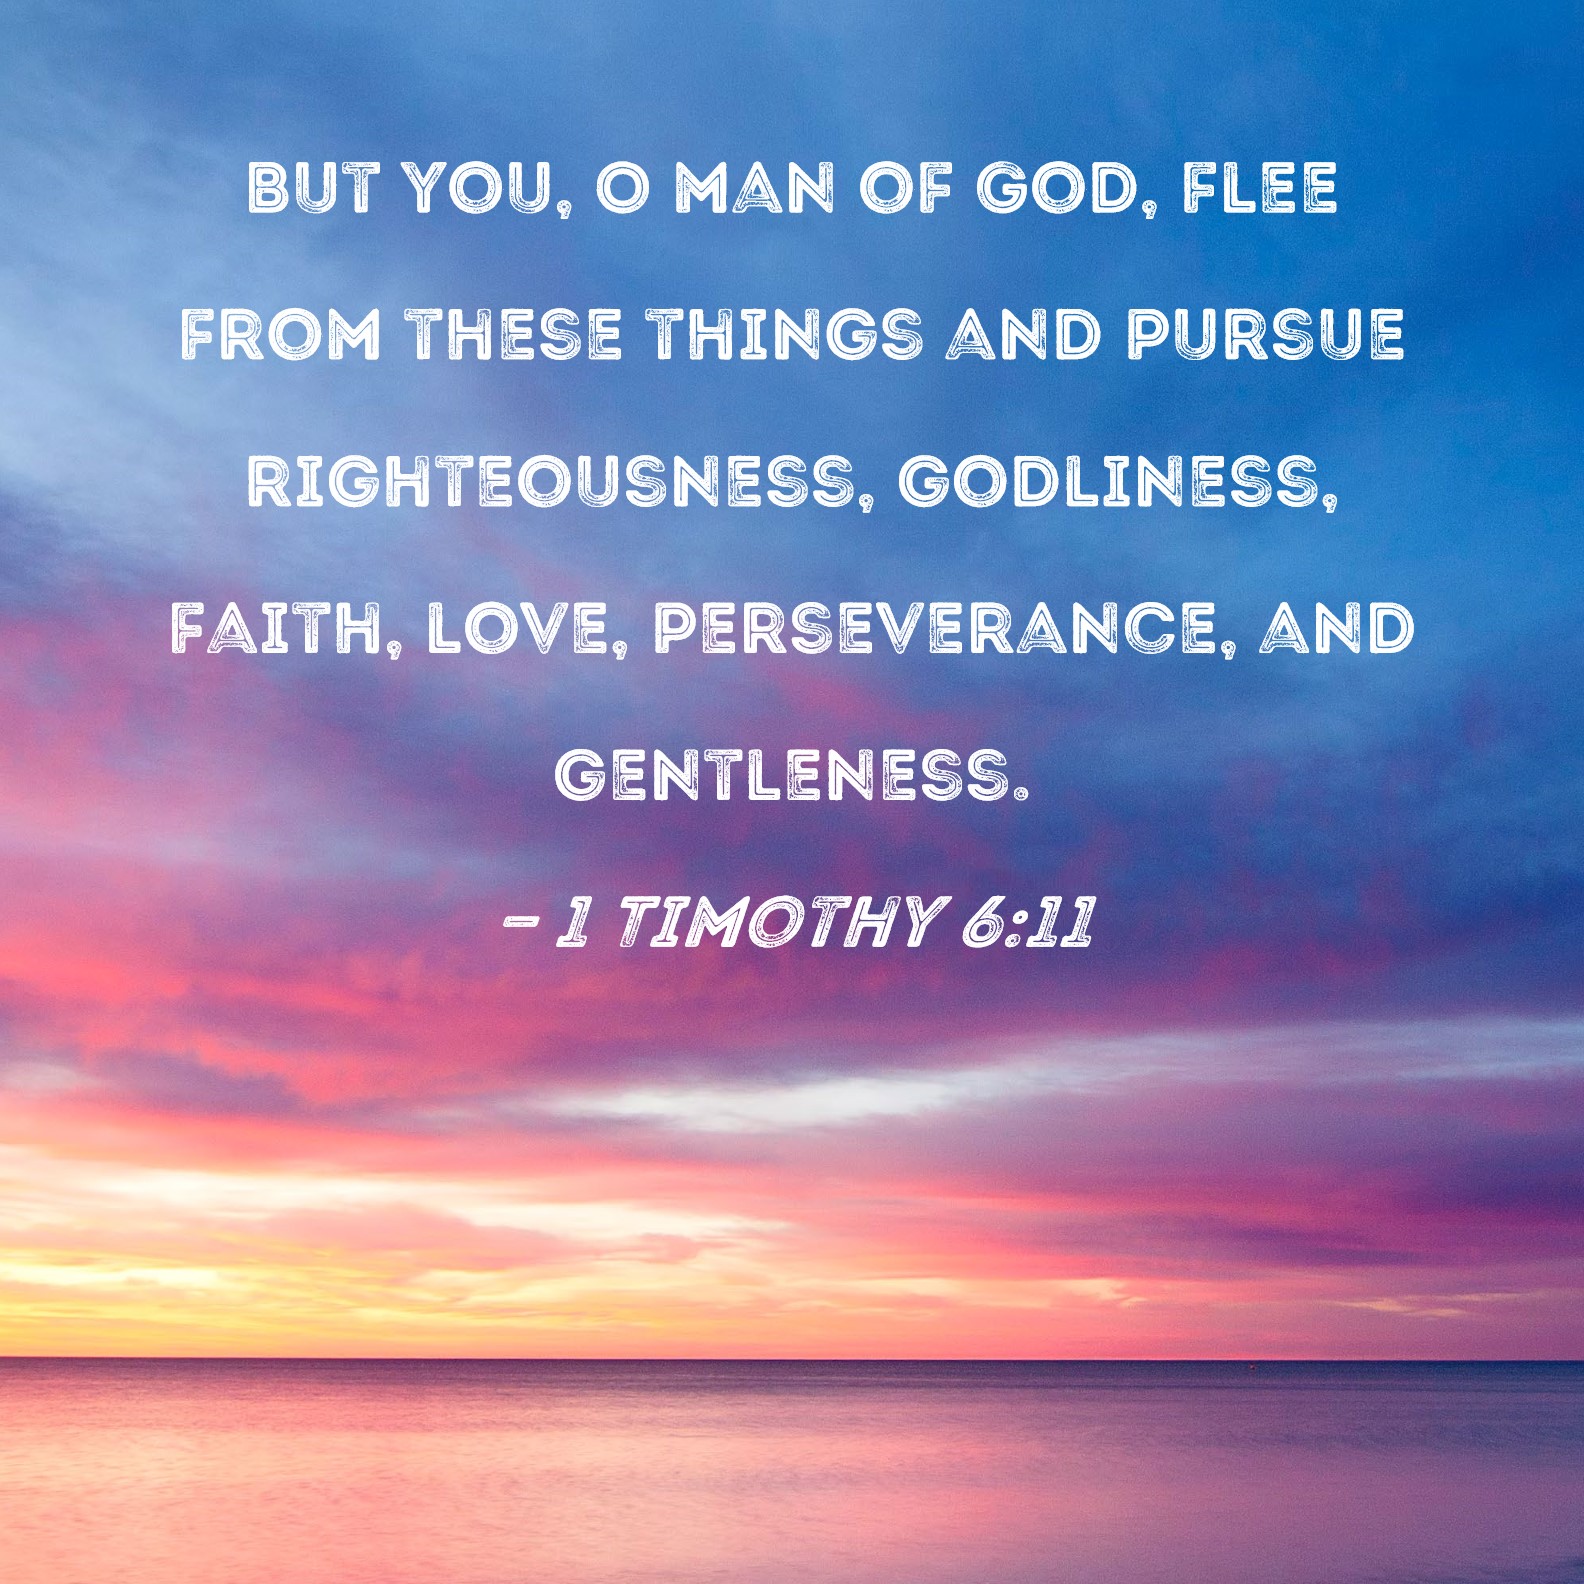 1 6:11 But you, man of God, from these and pursue righteousness, godliness, faith, love, perseverance, and gentleness.